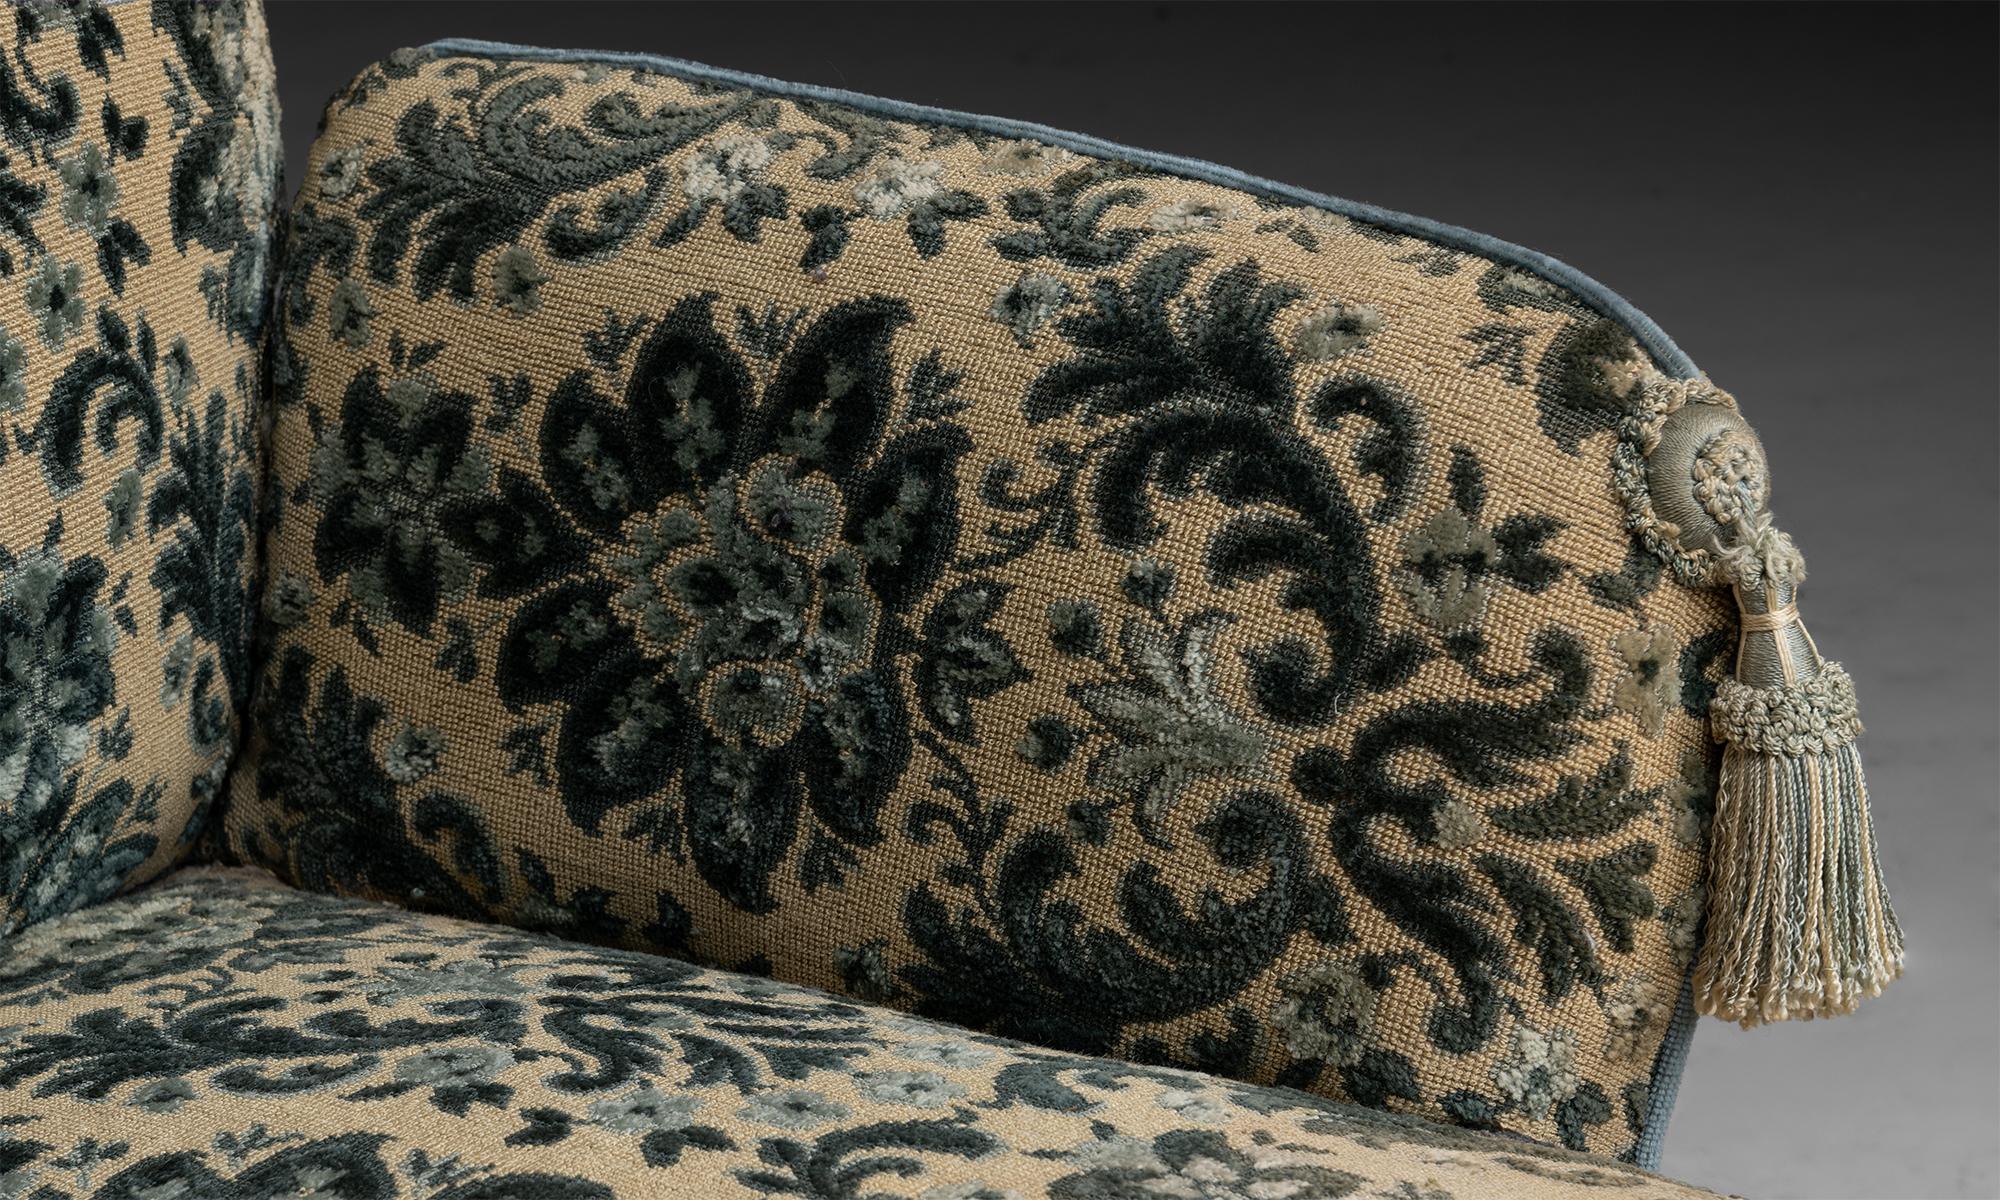 20th Century Chaise Lounge in Jacquard Fabric, France Circa 1910 For Sale